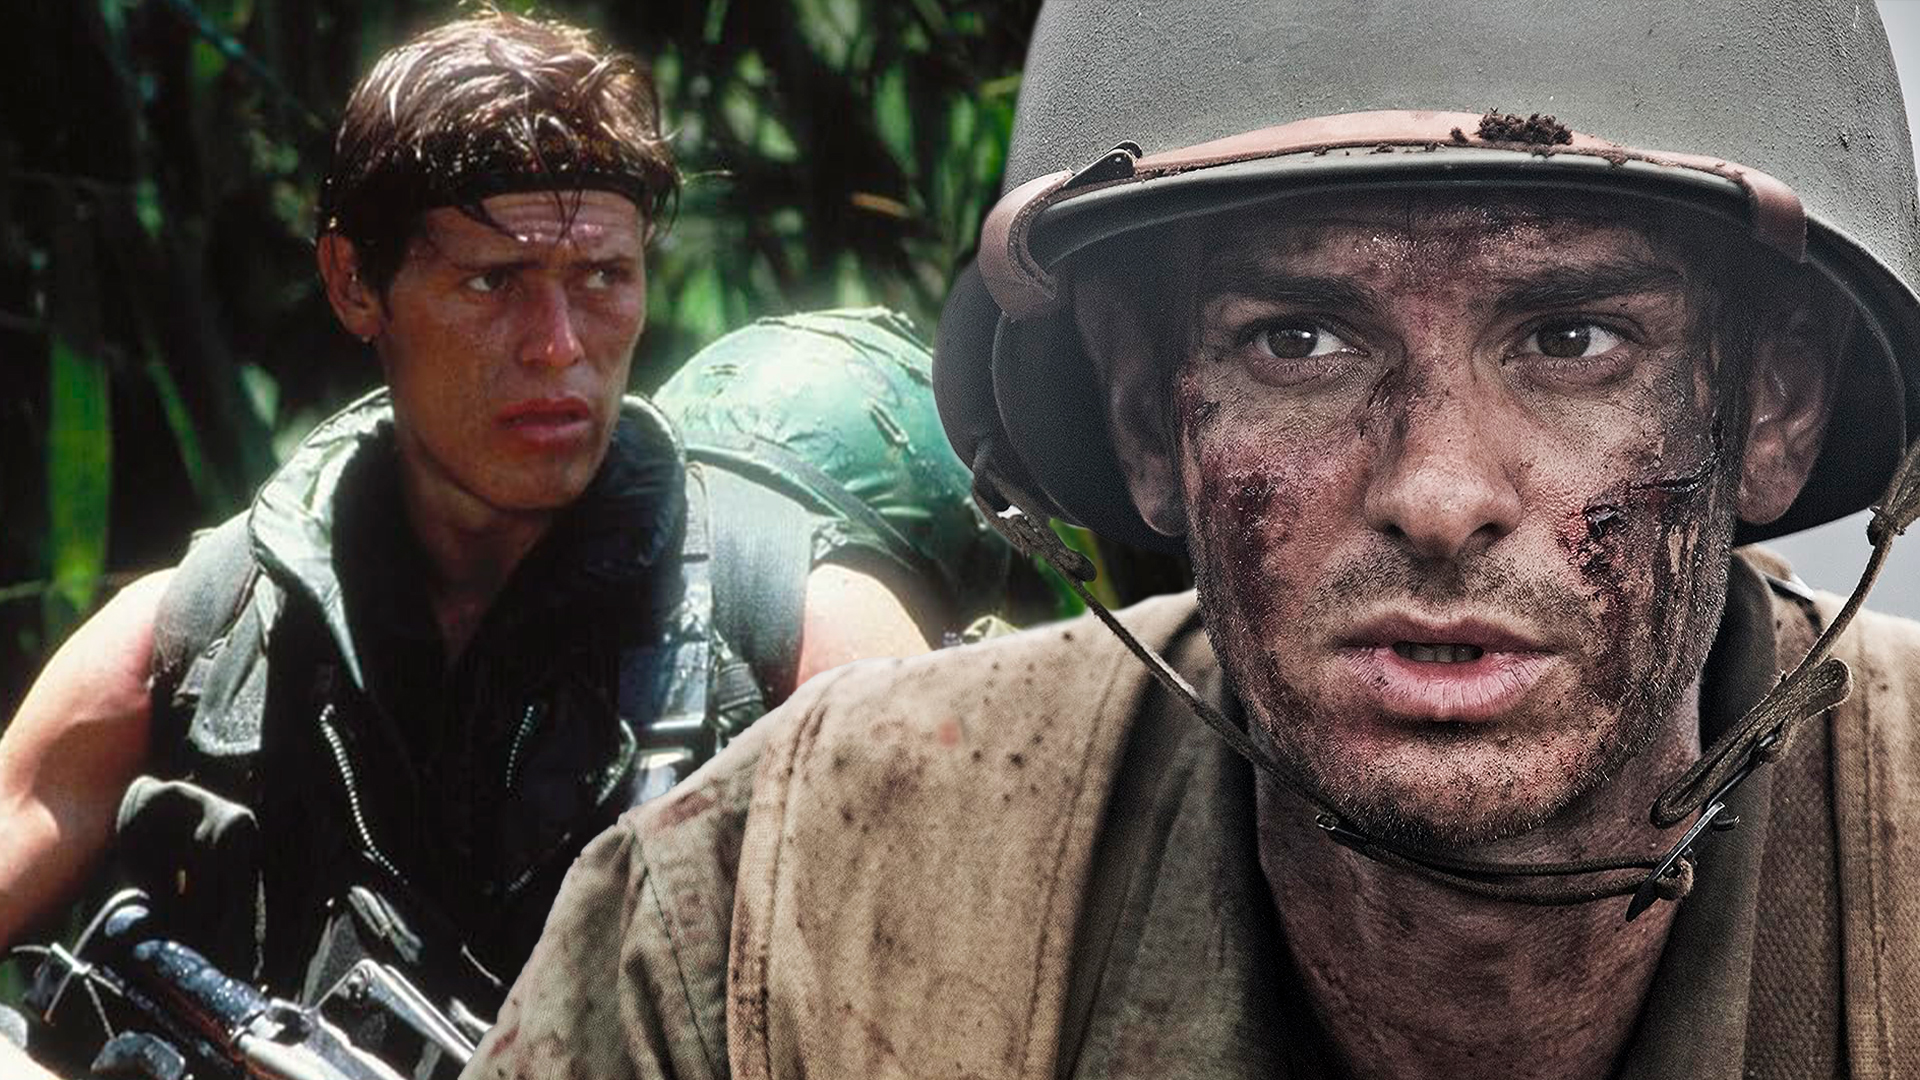 Ranking 10 War Movies for Their Remarkable Historical Accuracy